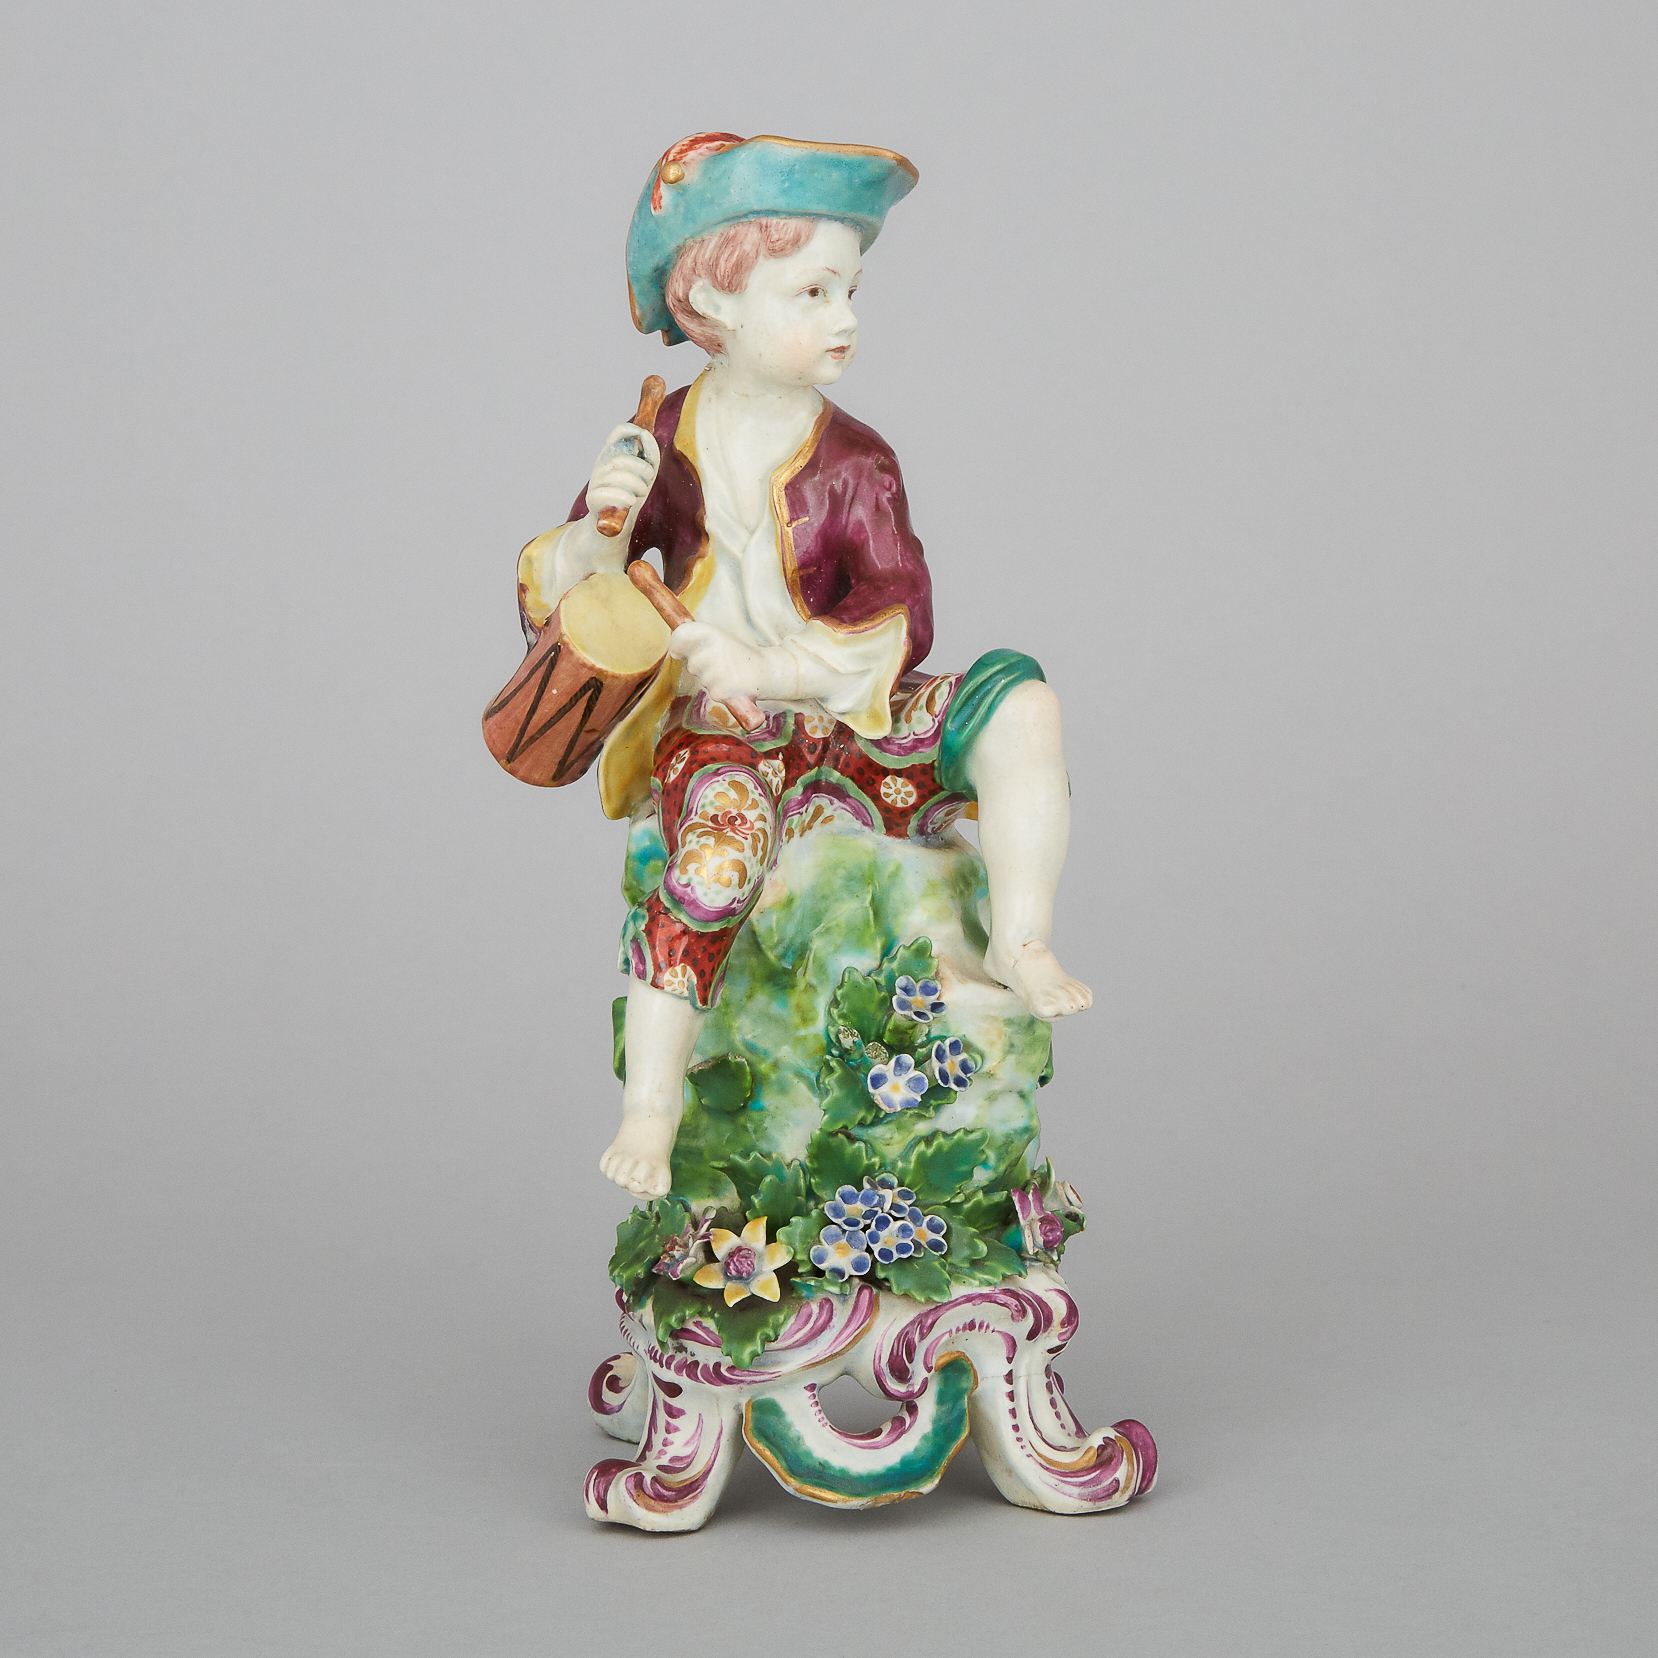 Bow Figure of a Drummer Boy, c.1760